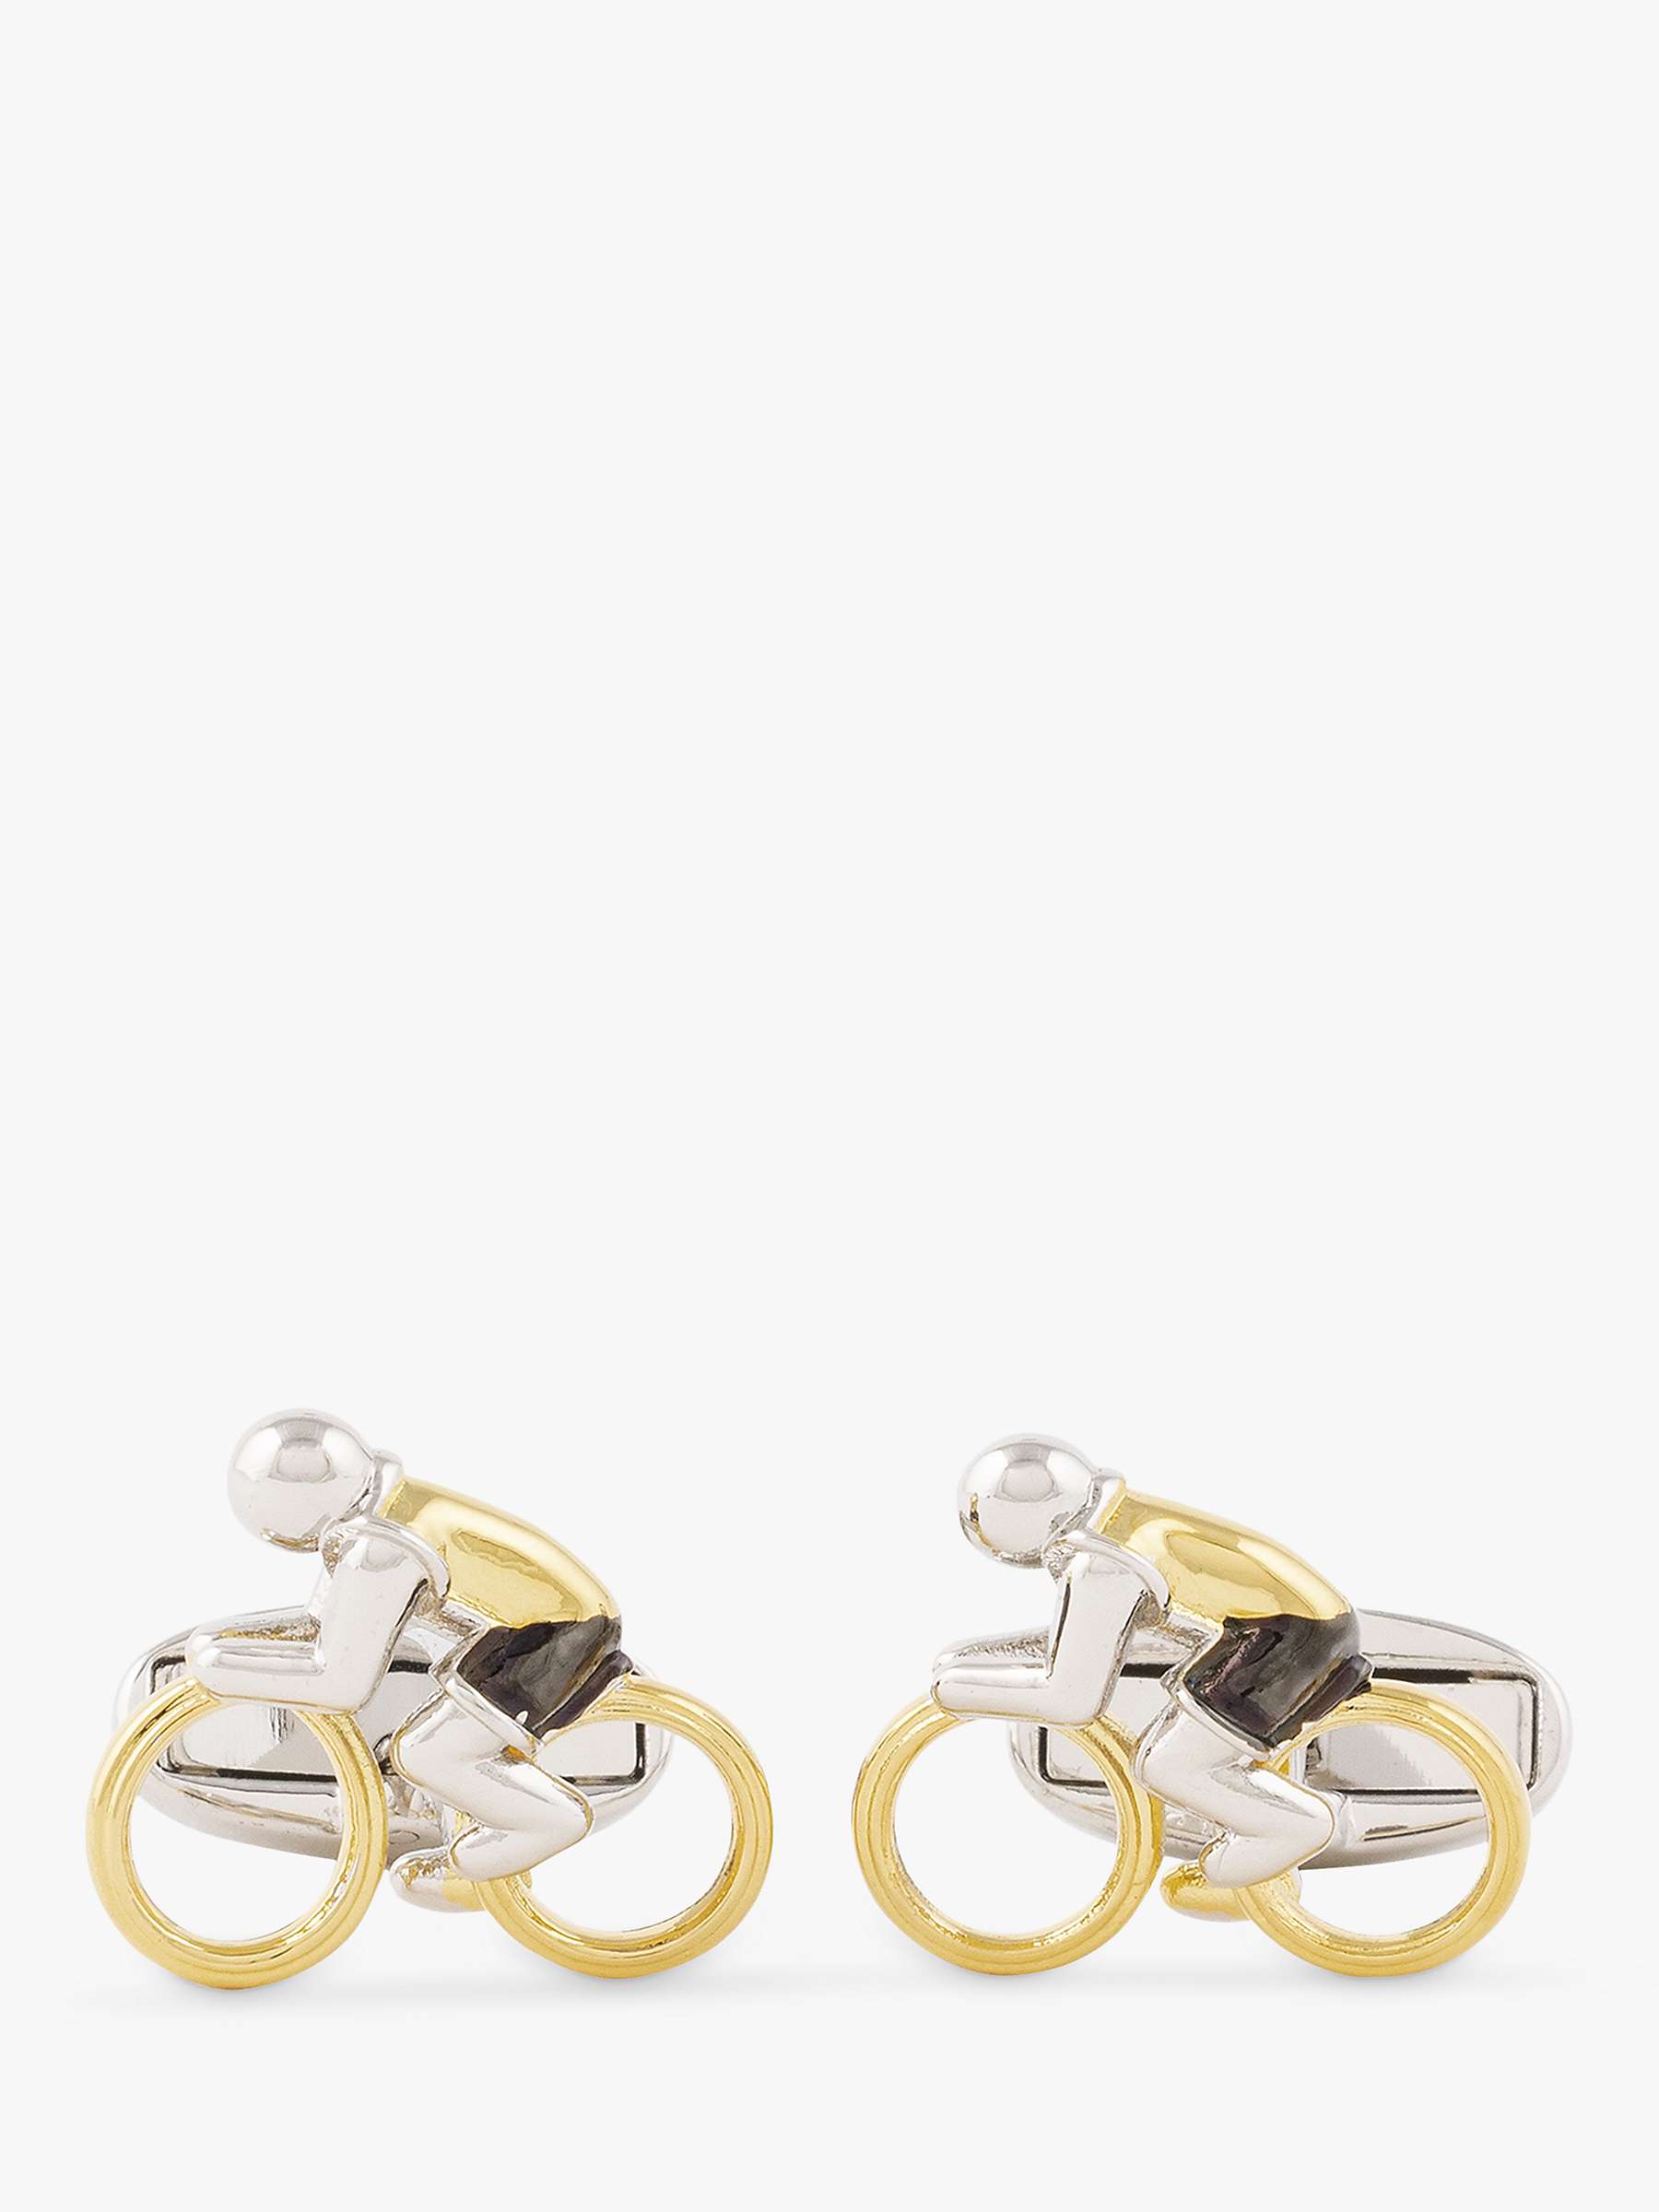 Buy Paul Smith Cyclist Cufflinks, Silver/Gold Online at johnlewis.com